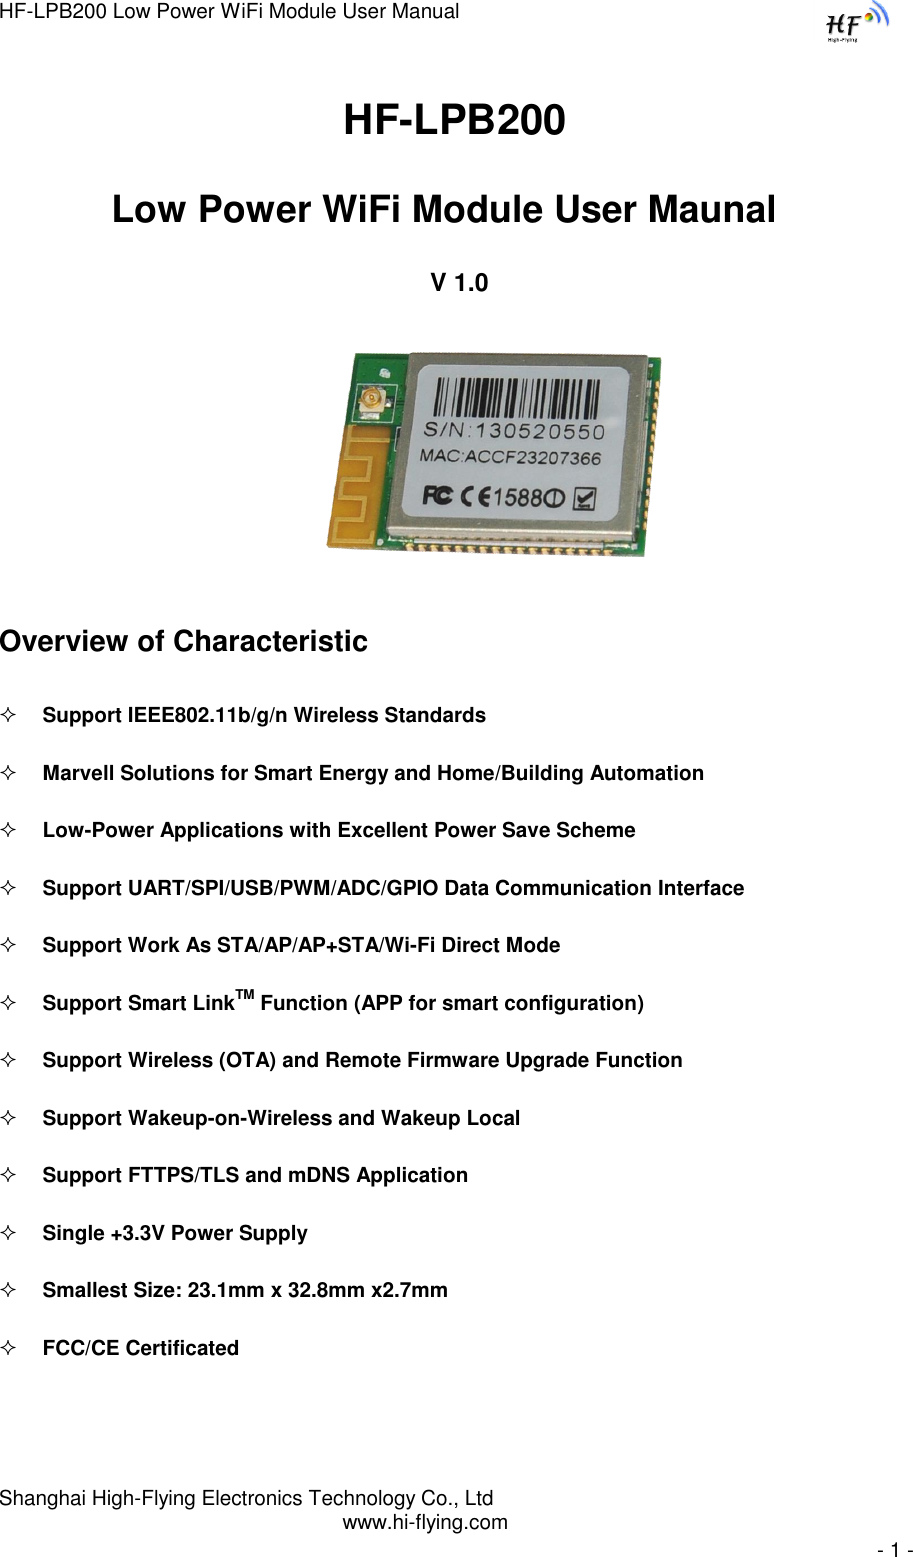 HF-LPB200 Low Power WiFi Module User Manual Shanghai High-Flying Electronics Technology Co., Ltd www.hi-flying.com   - 1 -                               HF-LPB200  Low Power WiFi Module User Maunal    V 1.0                                                            Overview of Characteristic  Support IEEE802.11b/g/n Wireless Standards  Marvell Solutions for Smart Energy and Home/Building Automation  Low-Power Applications with Excellent Power Save Scheme  Support UART/SPI/USB/PWM/ADC/GPIO Data Communication Interface  Support Work As STA/AP/AP+STA/Wi-Fi Direct Mode  Support Smart LinkTM Function (APP for smart configuration)  Support Wireless (OTA) and Remote Firmware Upgrade Function  Support Wakeup-on-Wireless and Wakeup Local   Support FTTPS/TLS and mDNS Application  Single +3.3V Power Supply  Smallest Size: 23.1mm x 32.8mm x2.7mm   FCC/CE Certificated  